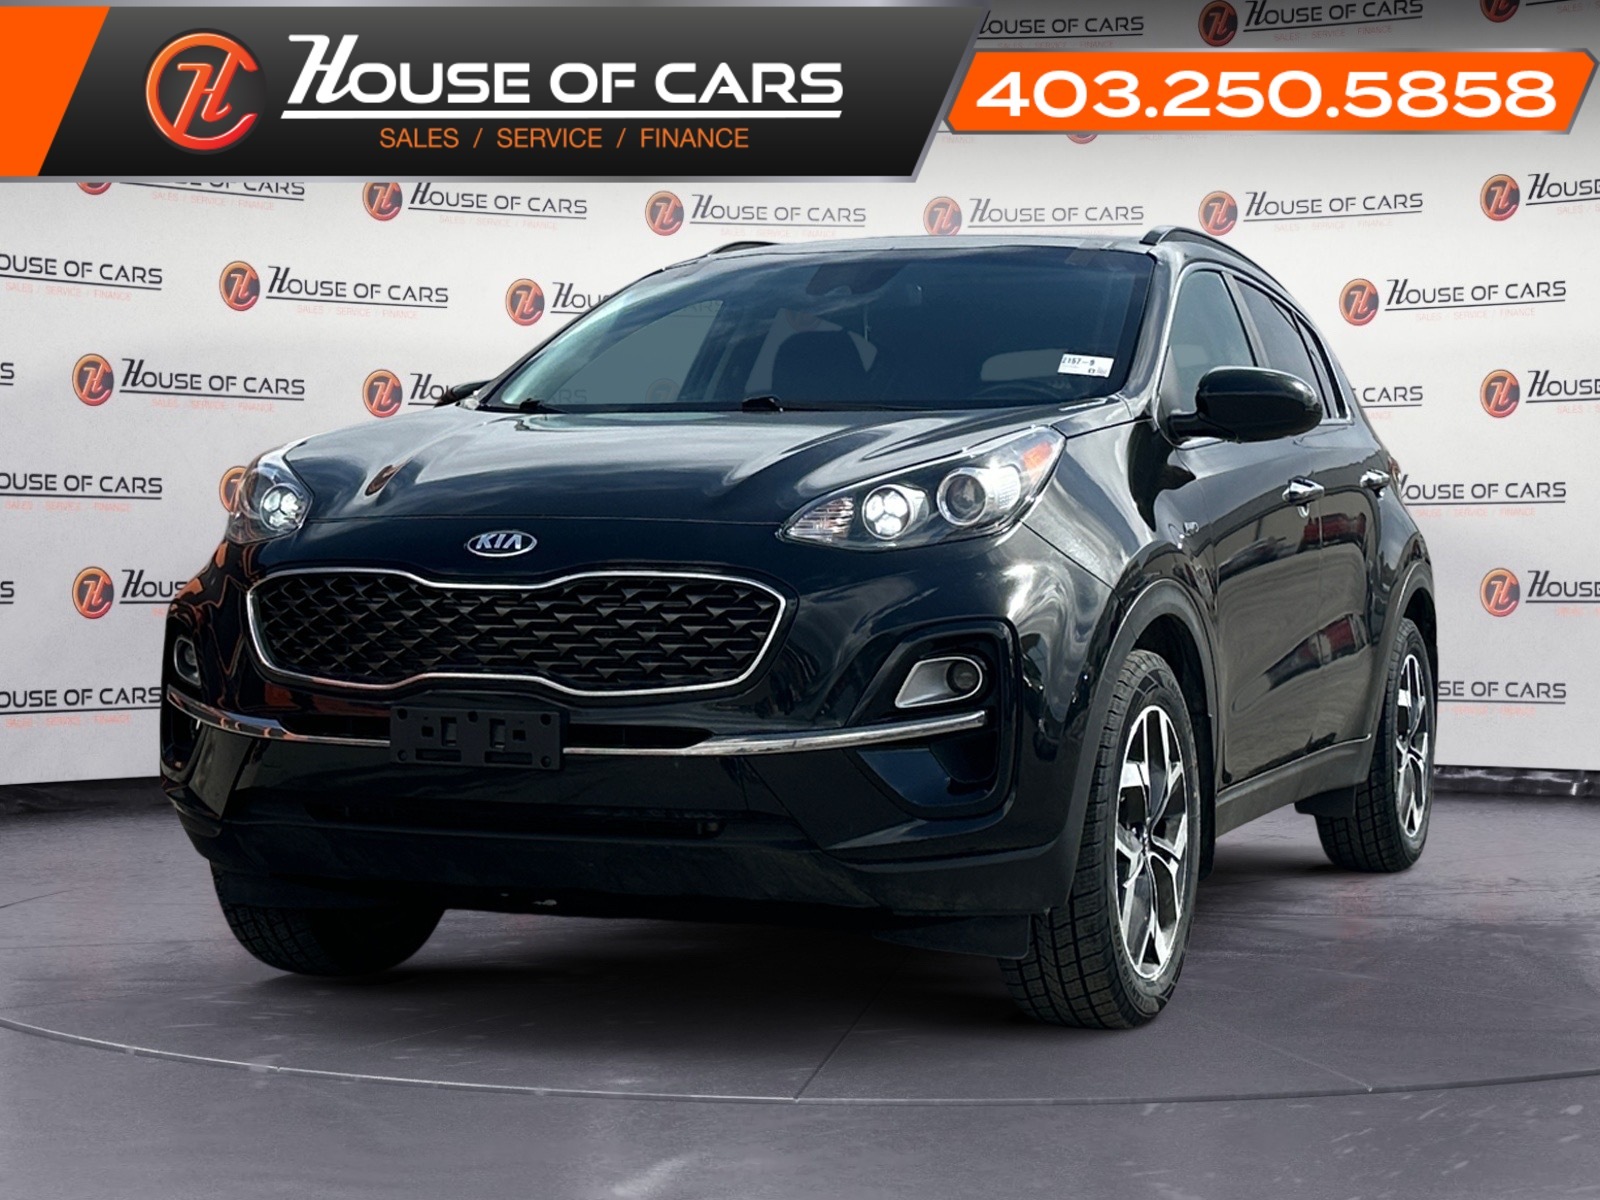 2020 Kia Sportage EX AWD -Ltd Avail- WITH/HEATED SEATS AND STEERING